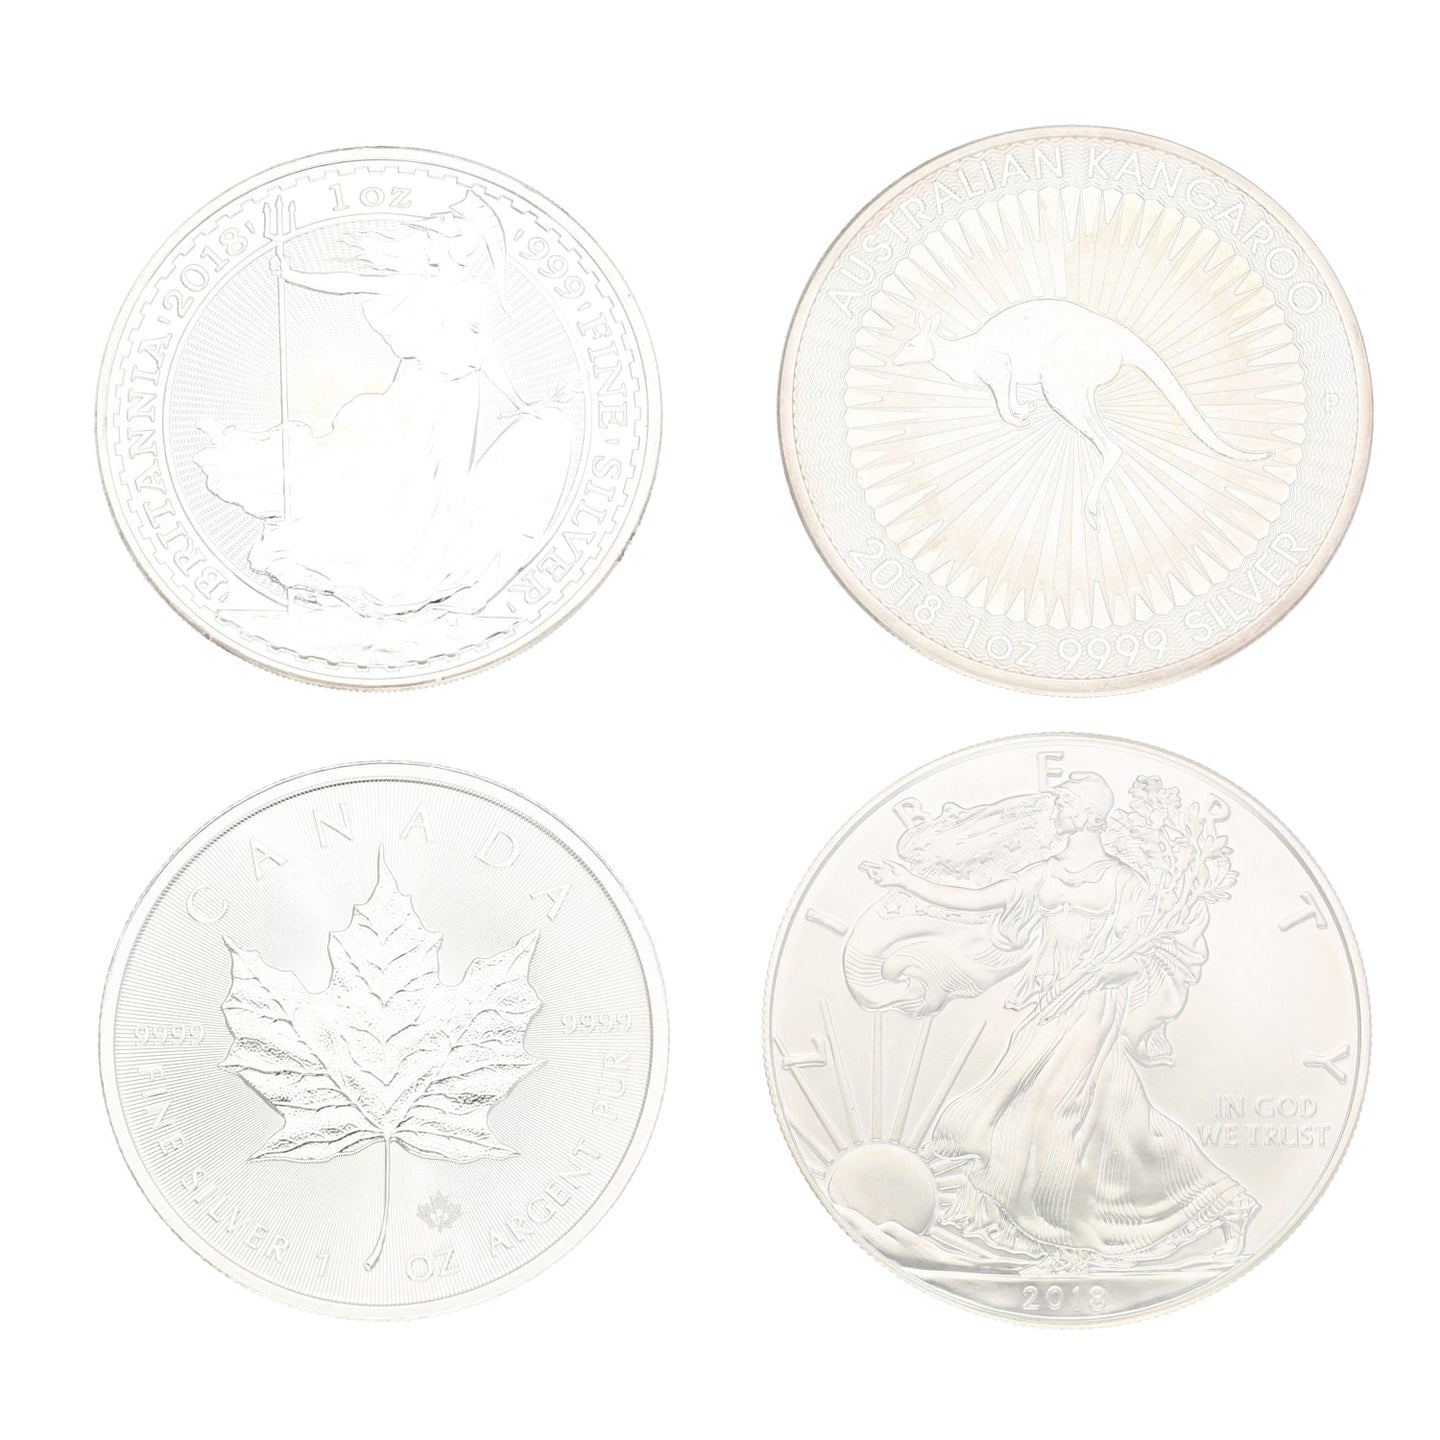 The Silver Coins Of The World Set 2018